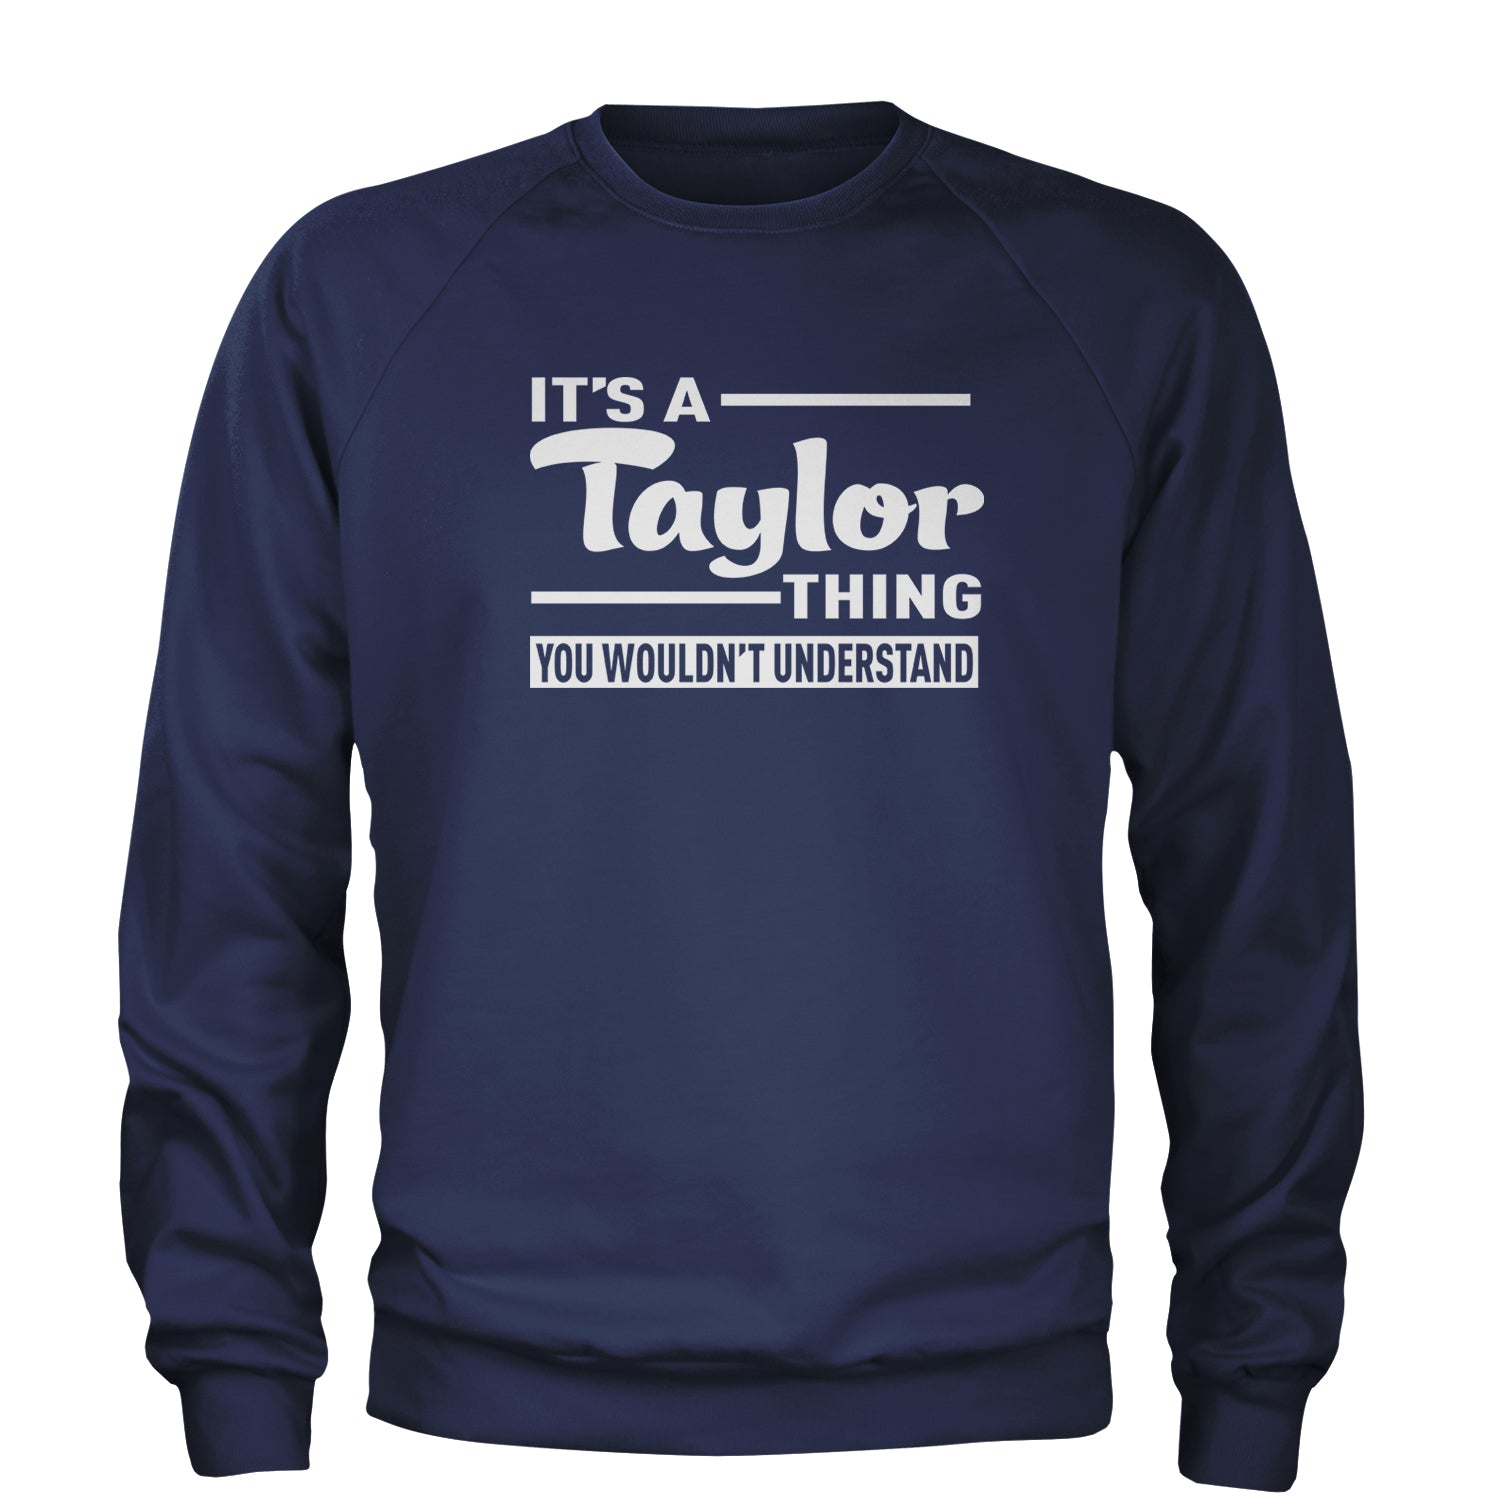 It's A Taylor Thing, You Wouldn't Understand Adult Crewneck Sweatshirt nation, taylornation by Expression Tees